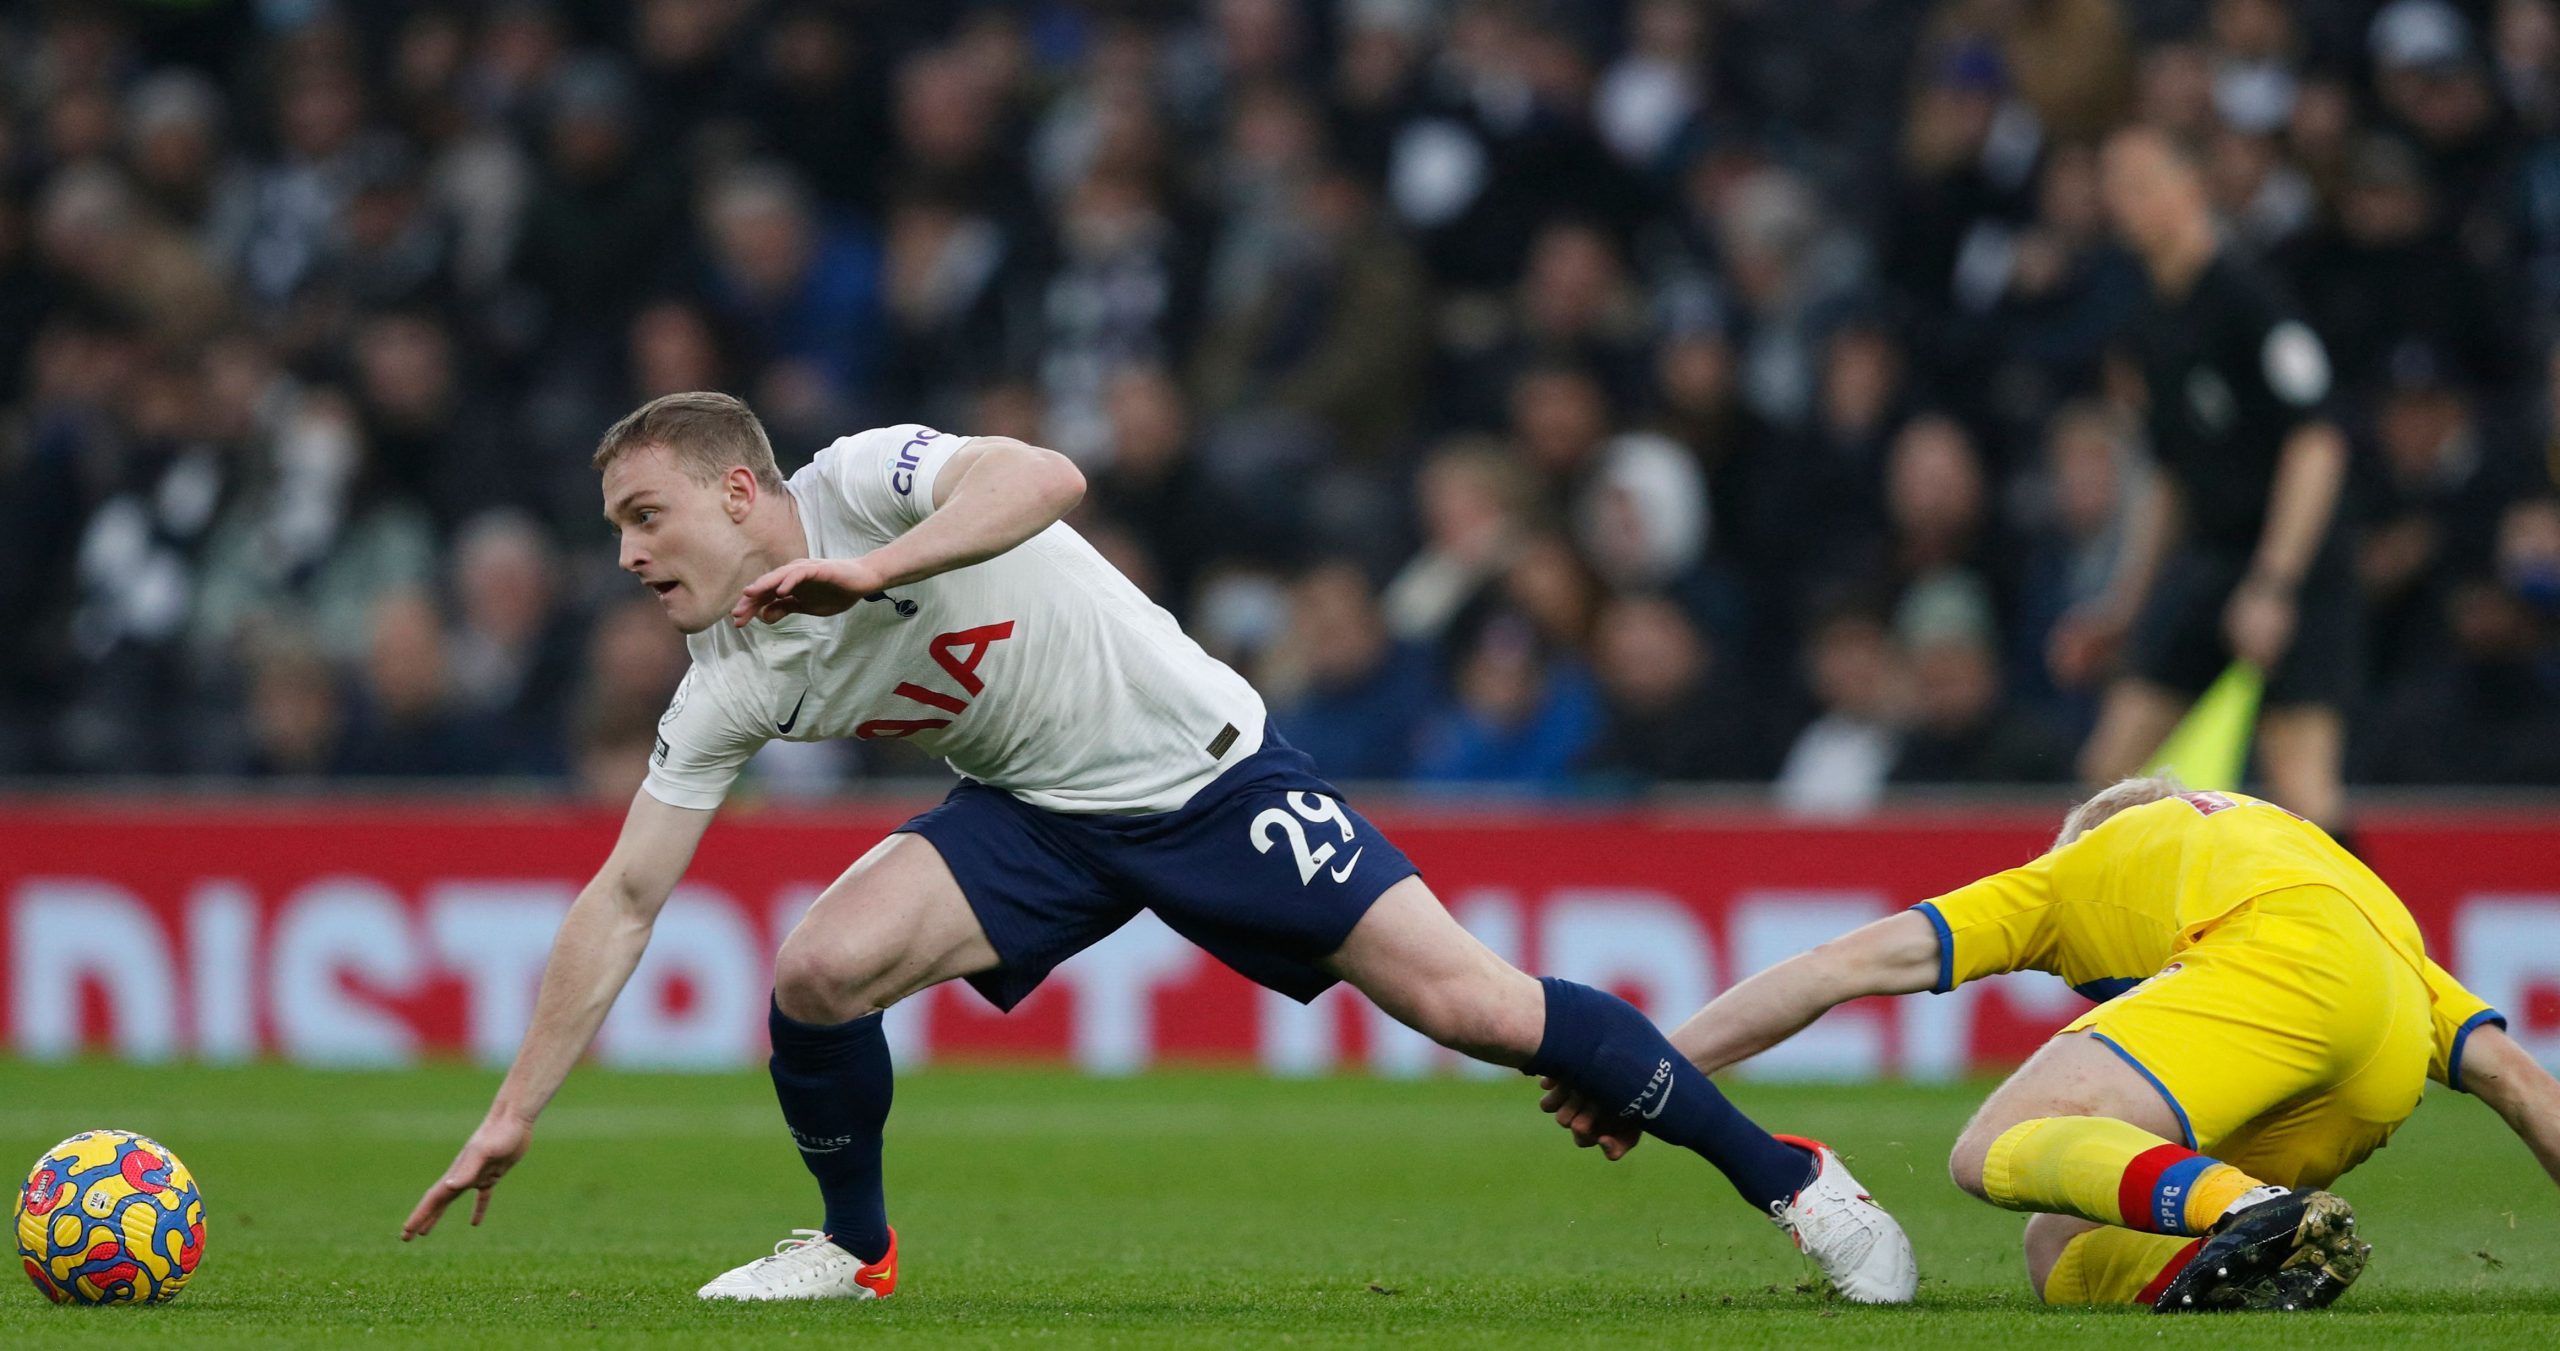 Oliver Skipp signs a new contract with Tottenham Hotspur. (Photo by ADRIAN DENNIS/AFP via Getty Images)